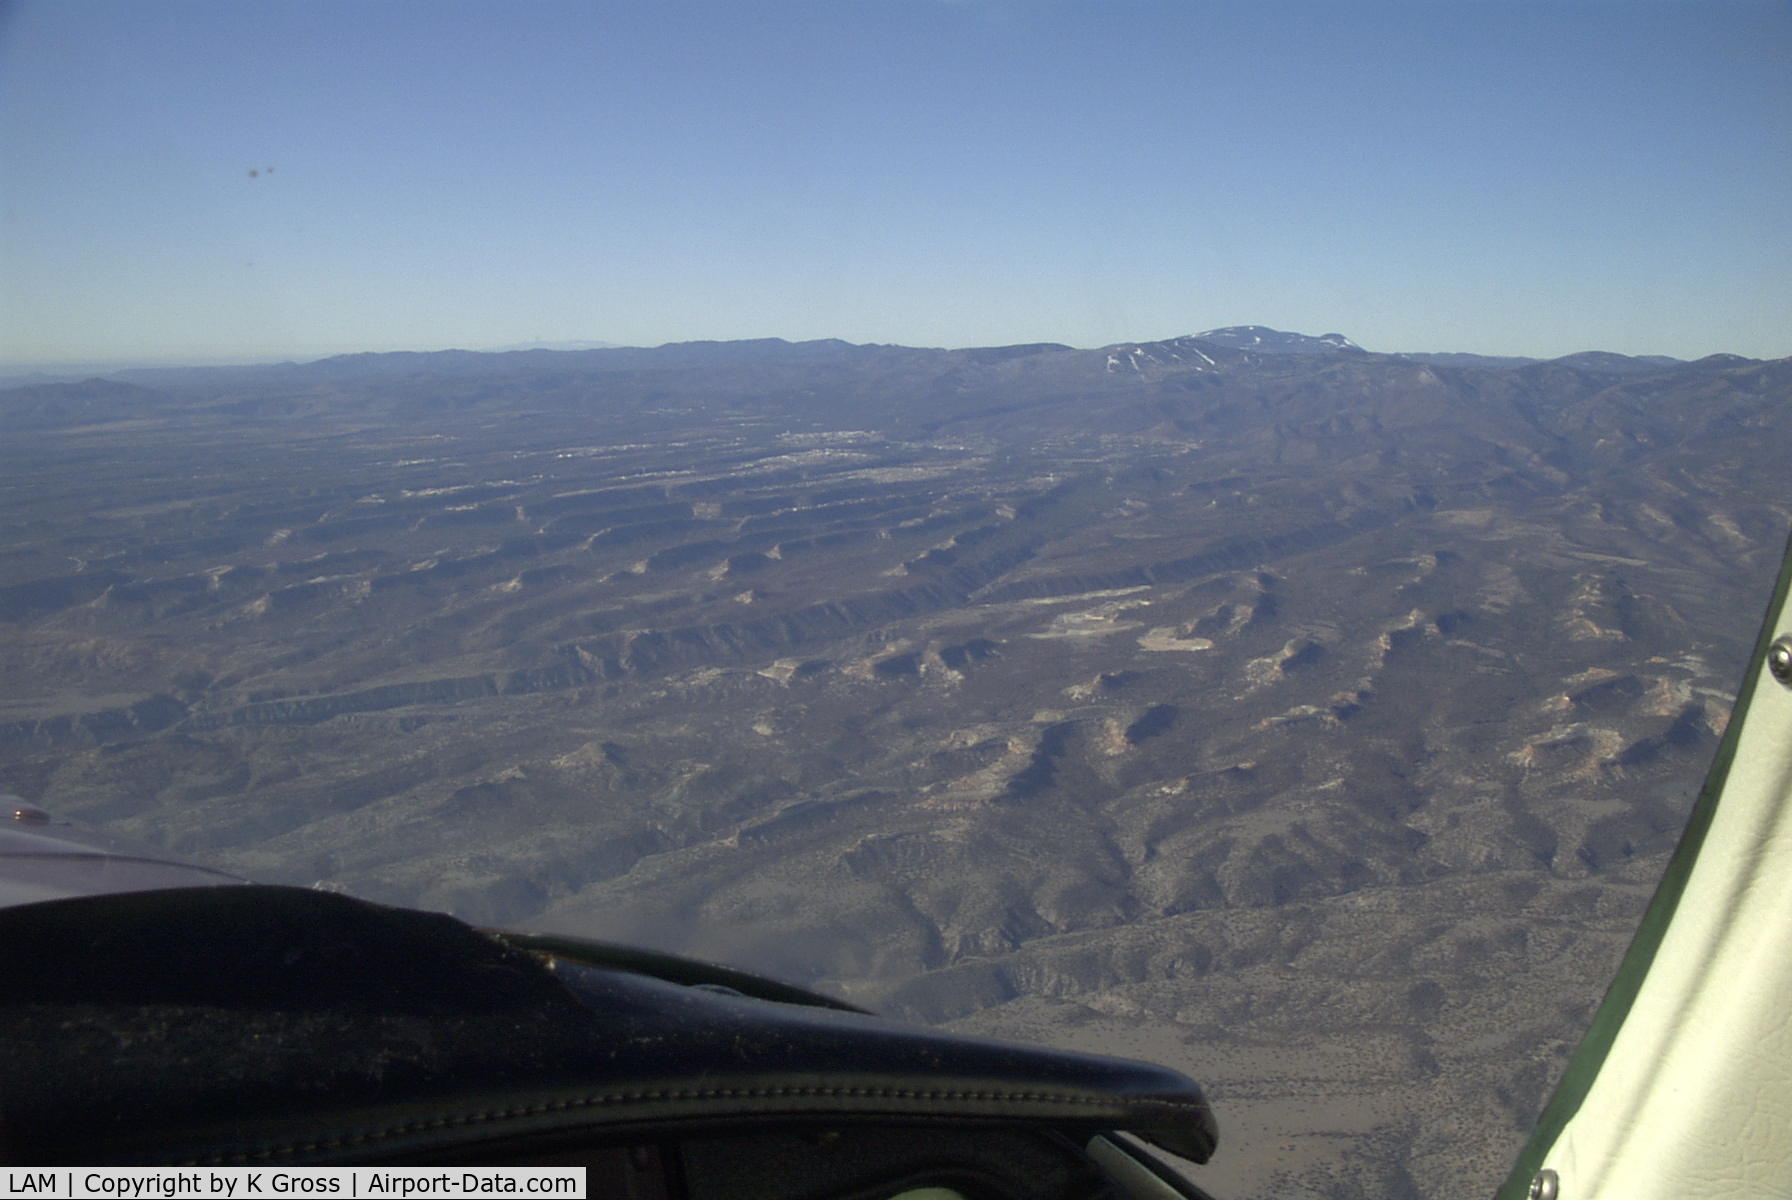 Los Alamos Airport (LAM) - Southbound over the valley looking to the west